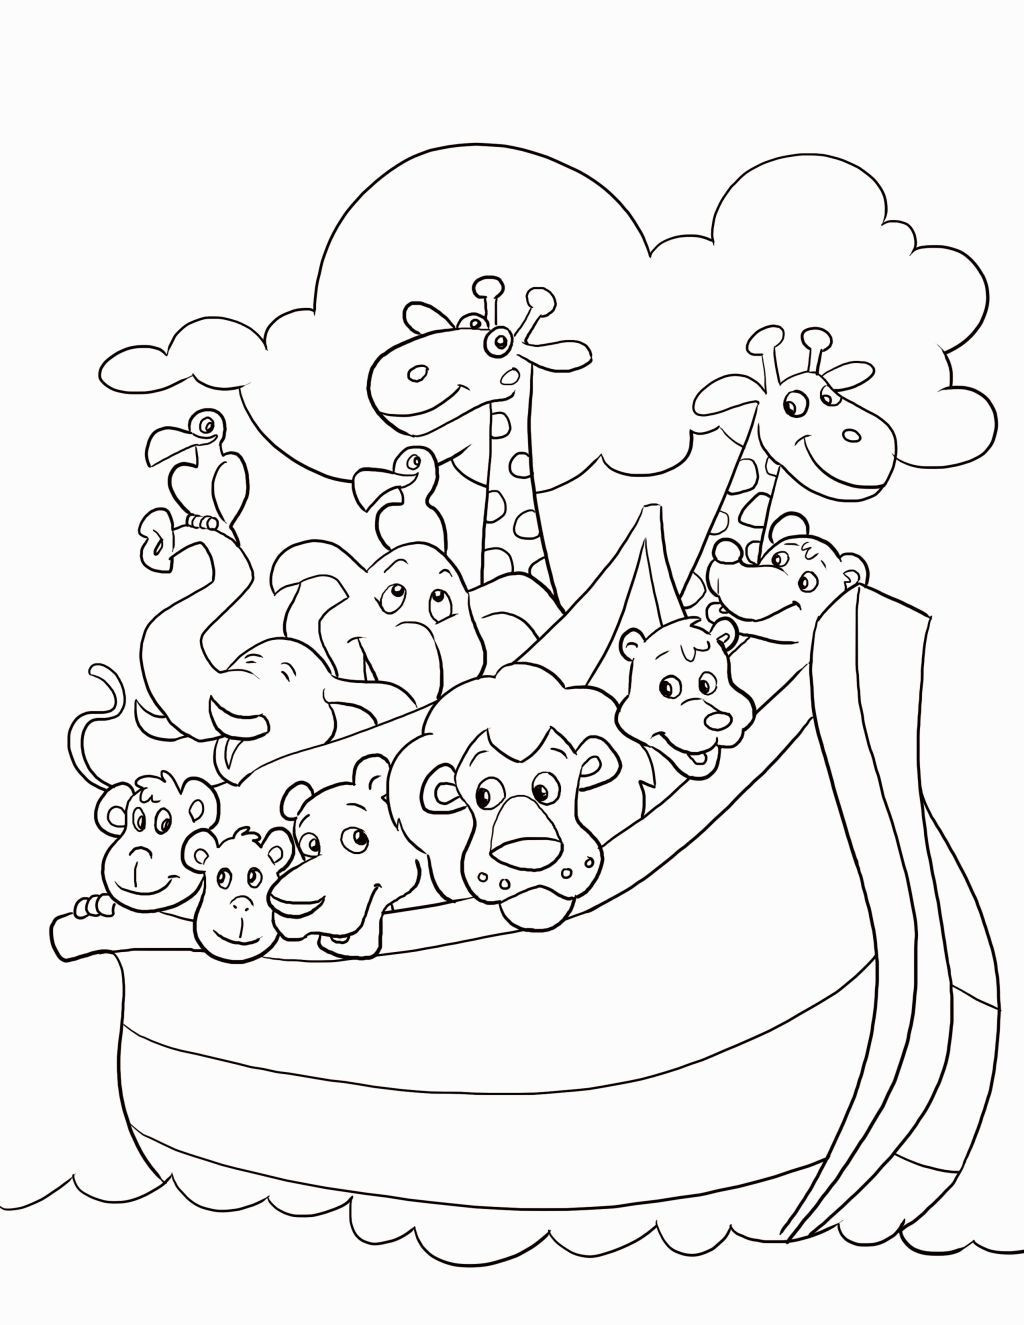 Free Printable Christian Coloring Pages
 Christian Coloring Pages For Preschoolers